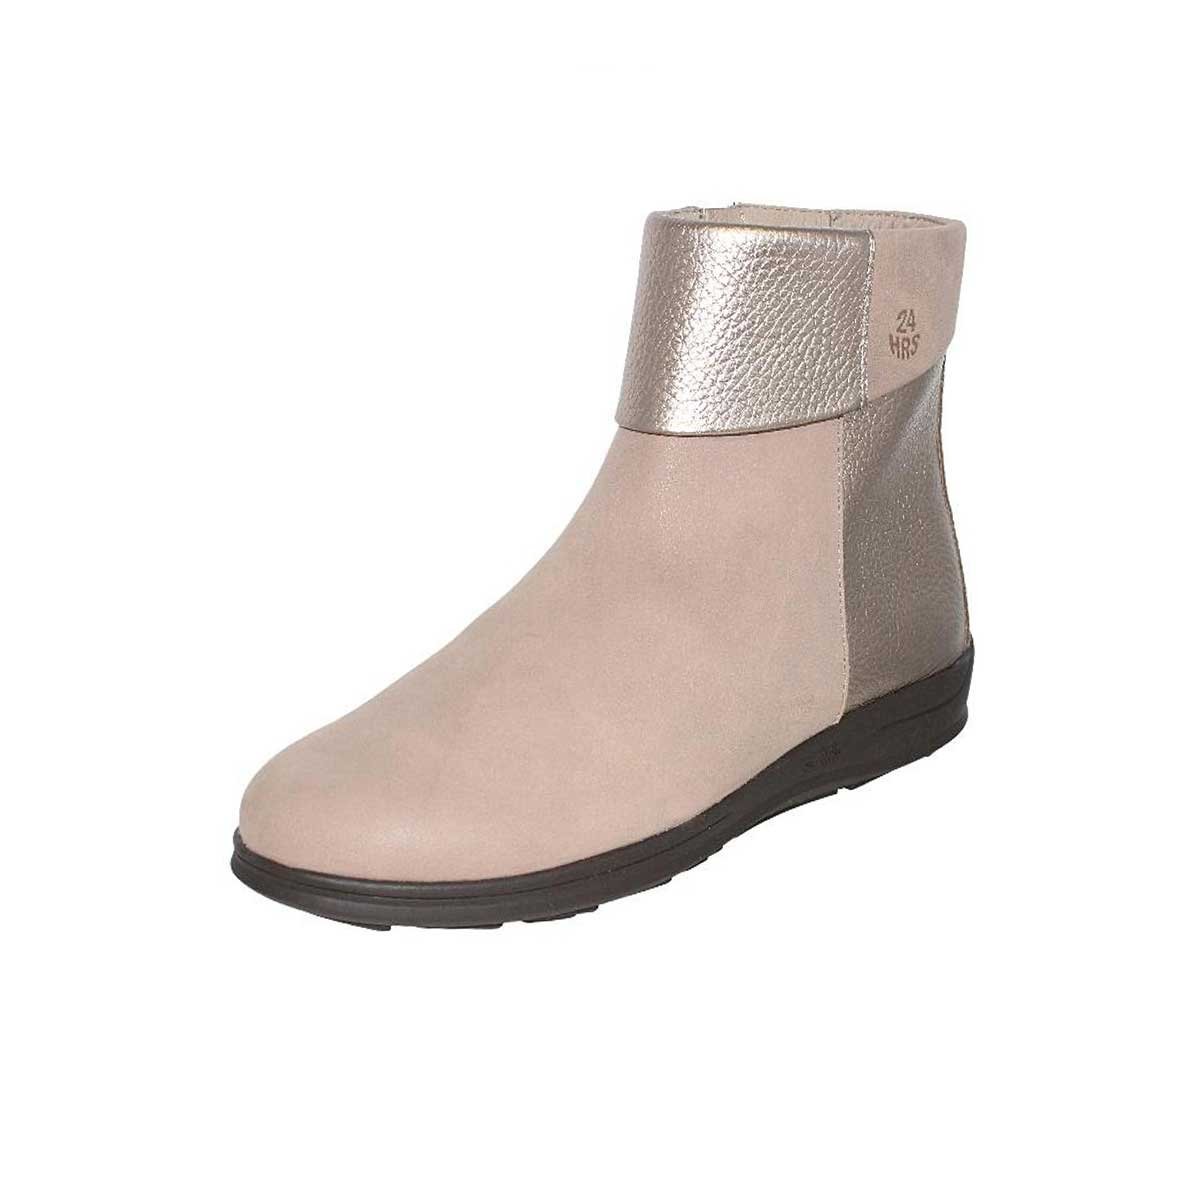 Bootie Plano Mixto 24 Hrs. 22963 Cf